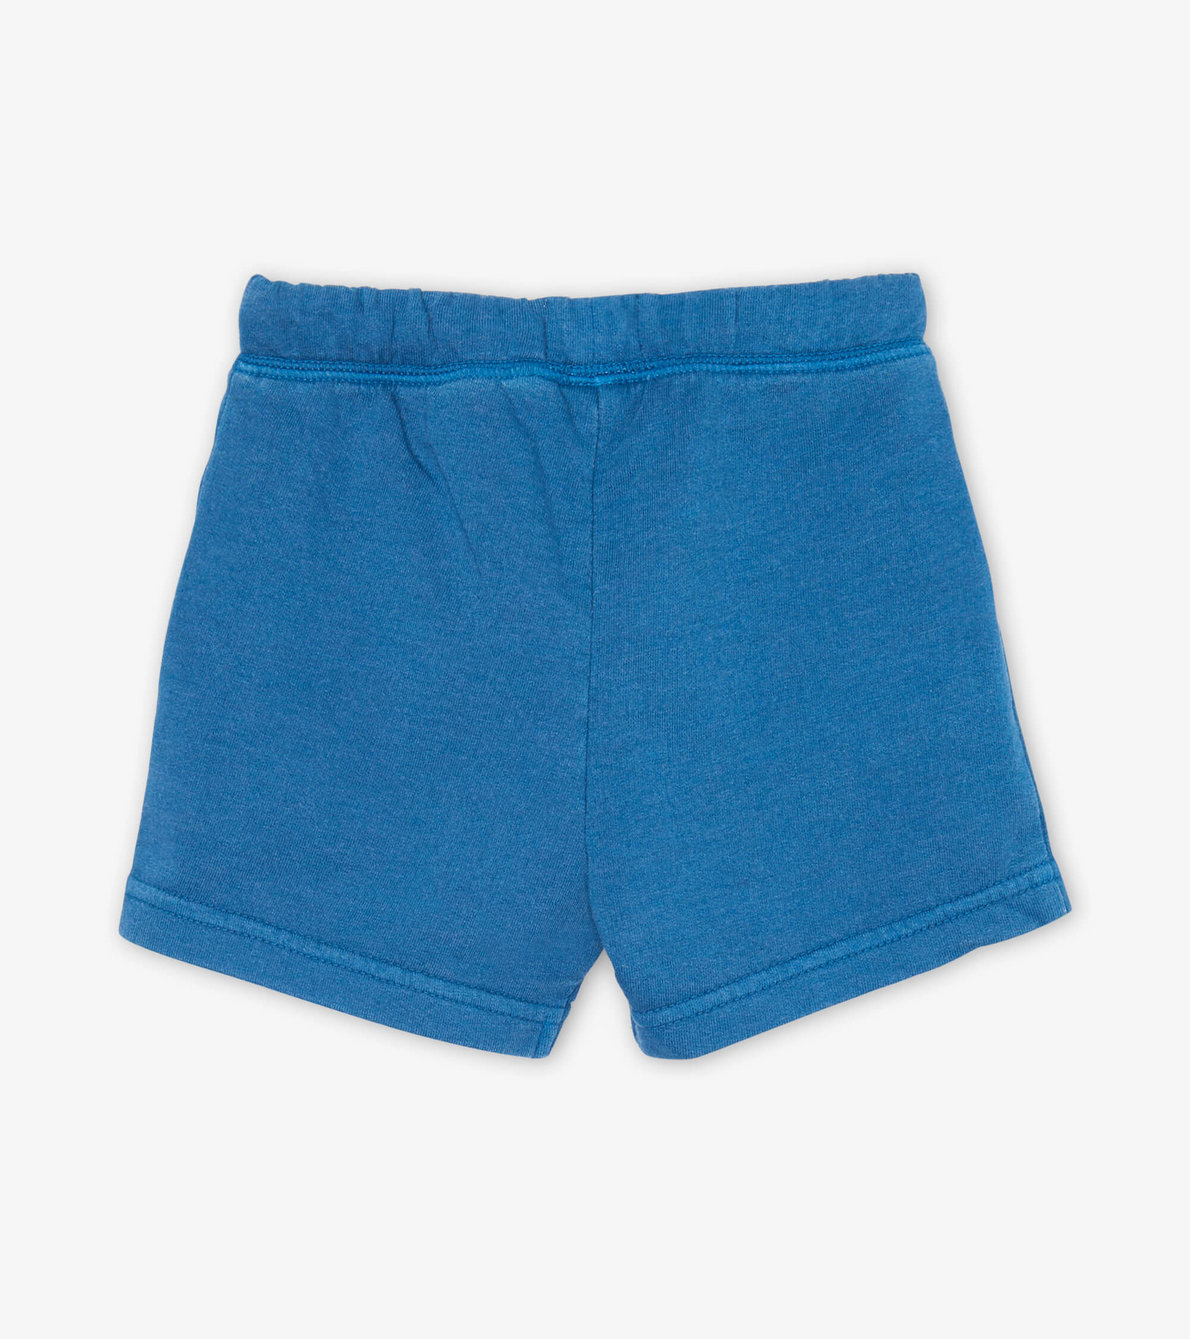 View larger image of Moroccan Blue Baby Cotton Shorts